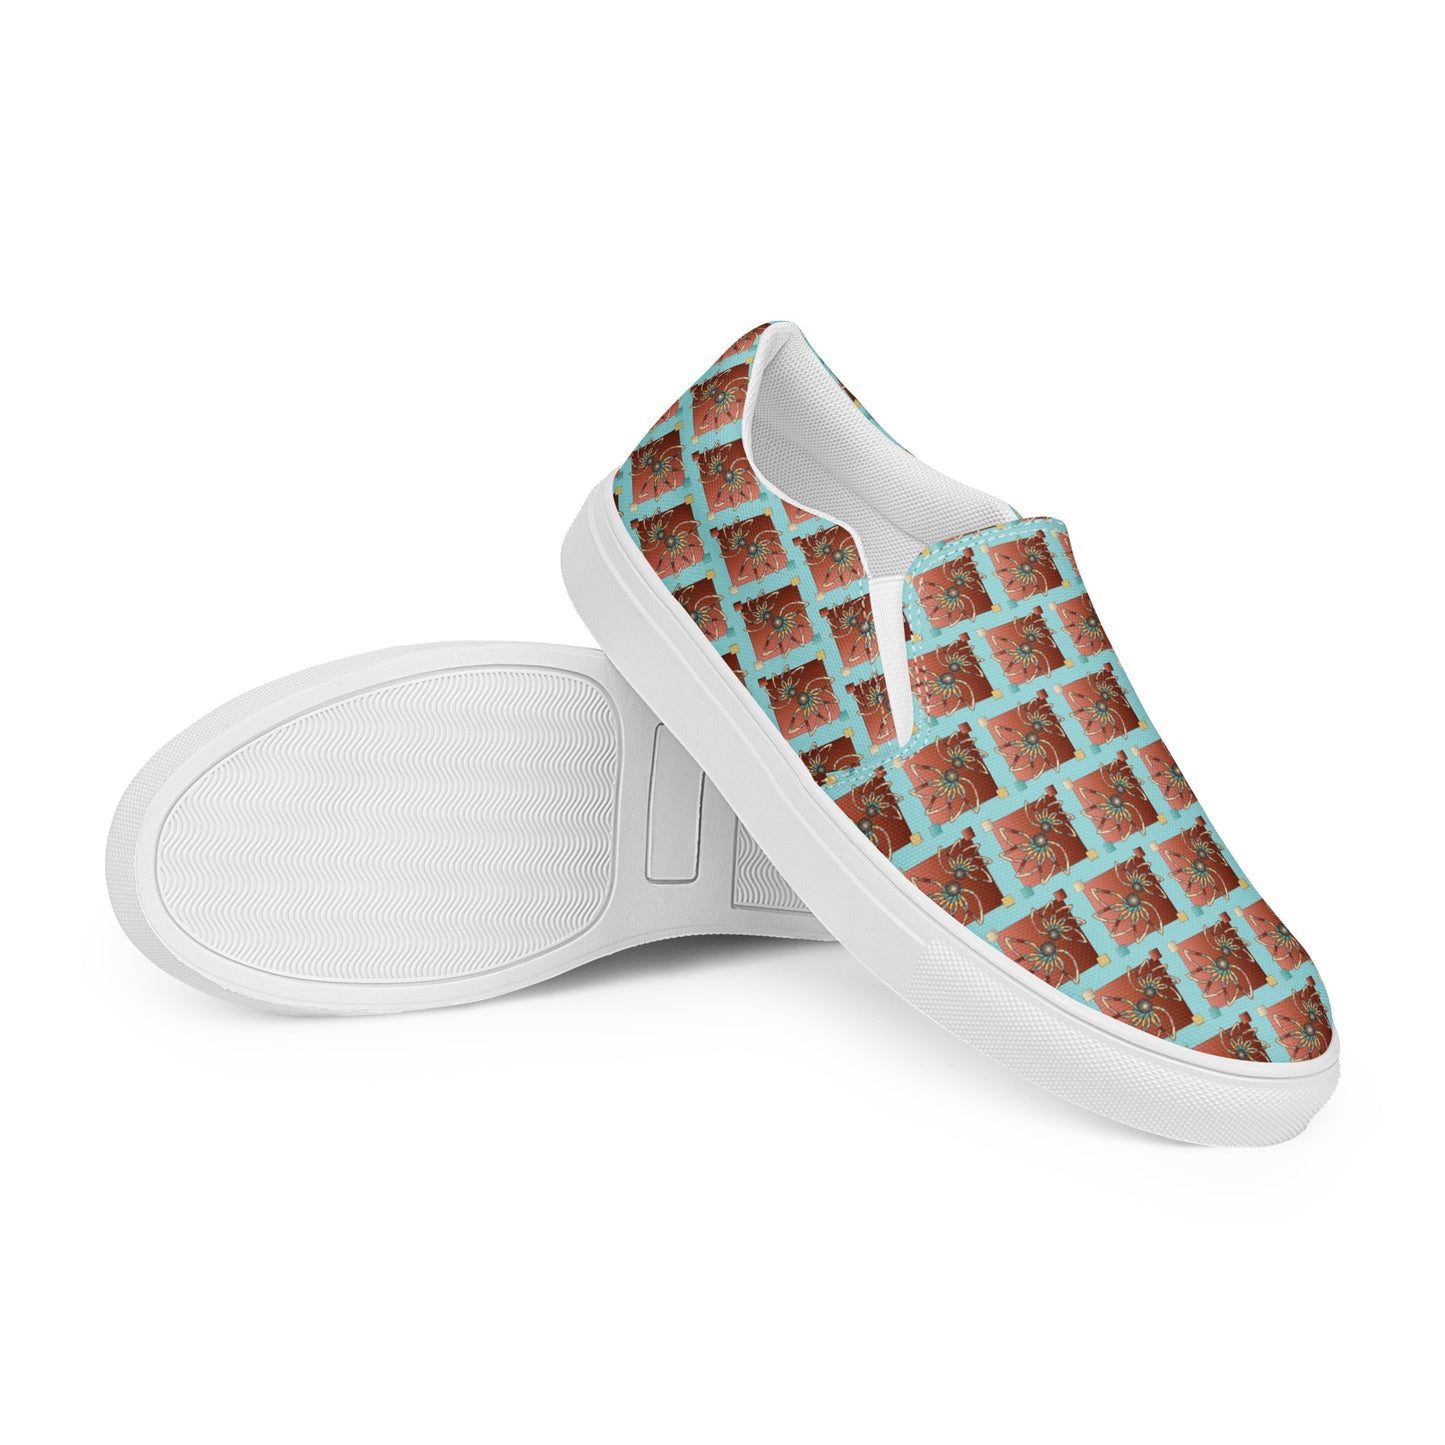 Women’s slip-on canvas shoes Kukloso Abstractical No 61 - Free Shipping